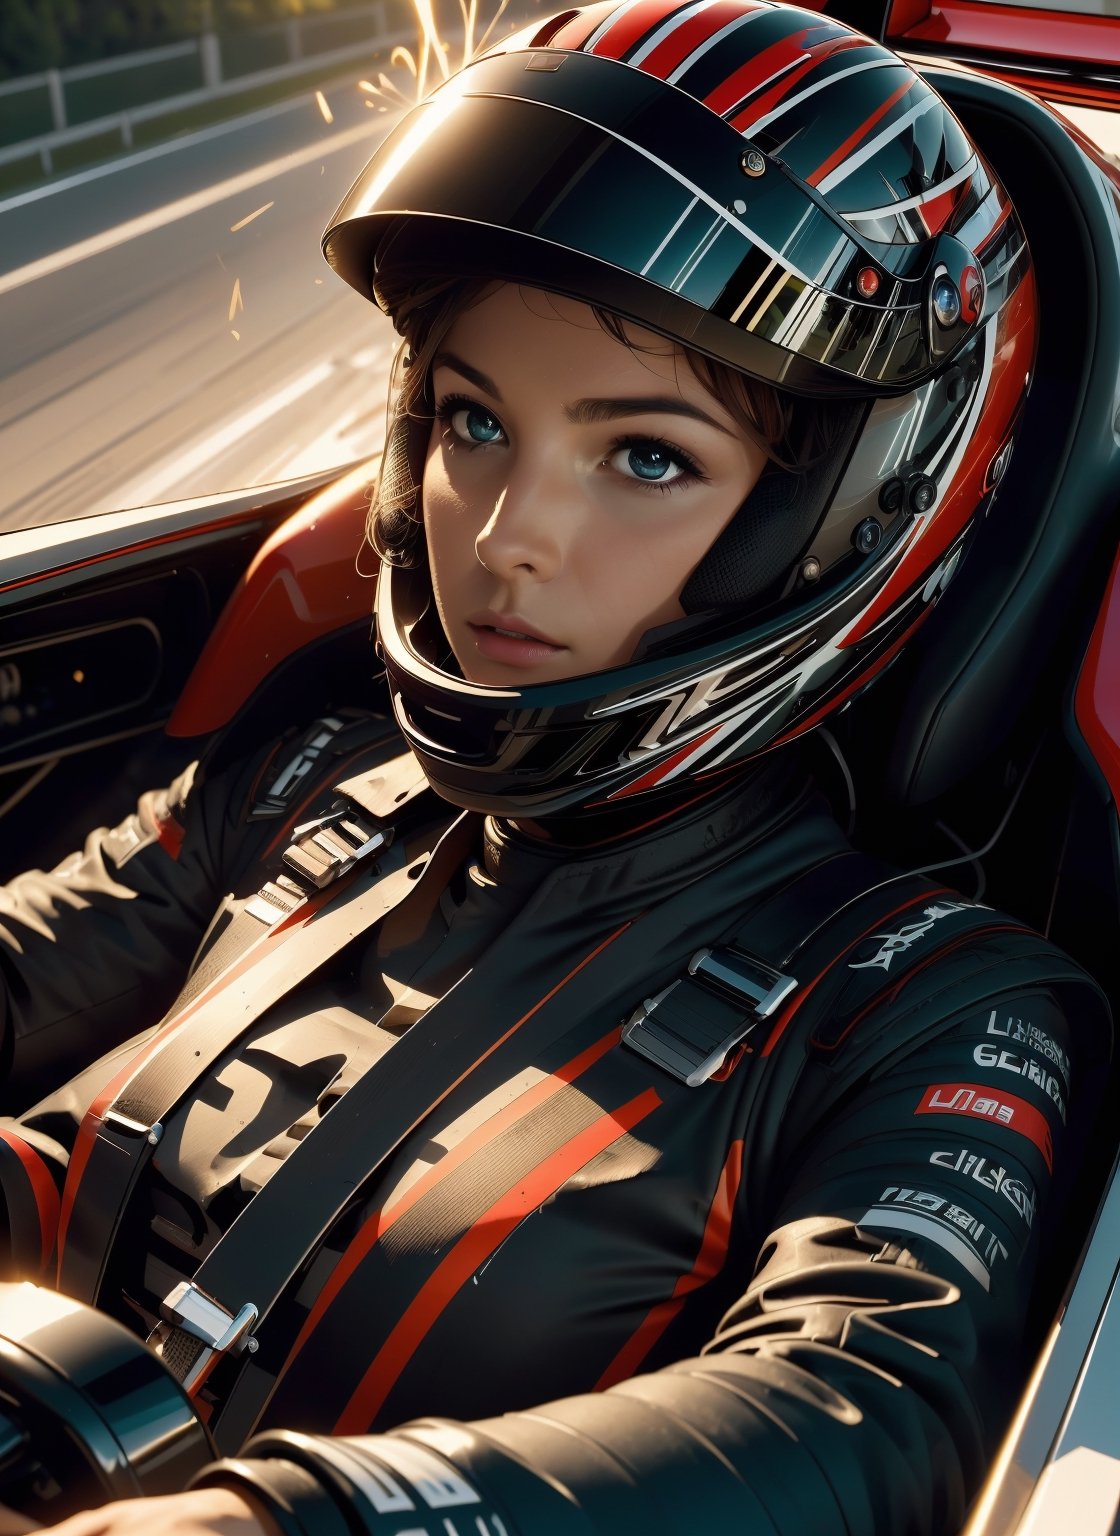 (((masterpiece))), (((best quality))), (((driving a formula racing))), ((fingers on steering wheel)), sitting on driver's seat with full speed, sharp eyes, determined, ((helmet)), ((black red uniform)), (((speed lines))), ((electricity)), ((spiral wind)), solo, 1girl, most beautiful, big tits, sweat, slim figure, lora:girllikeformularacing:1
